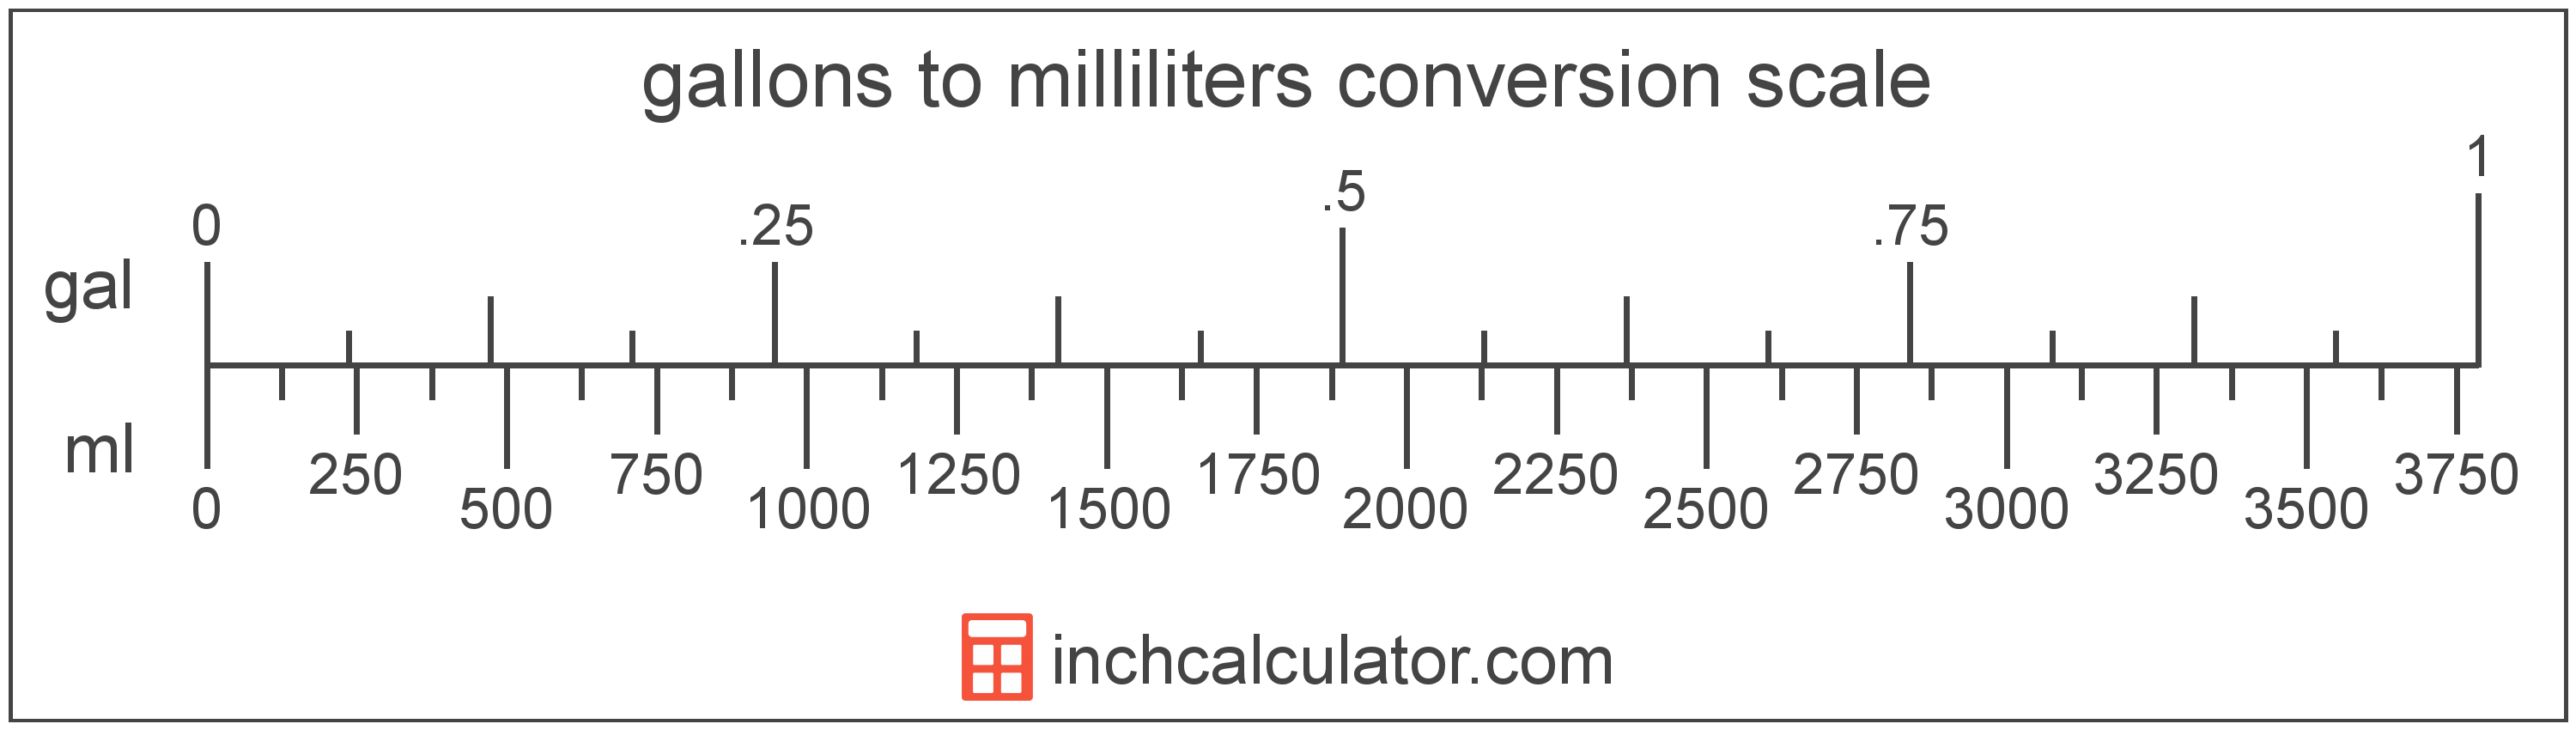 conversion scale showing milliliters and equivalent gallons volume values